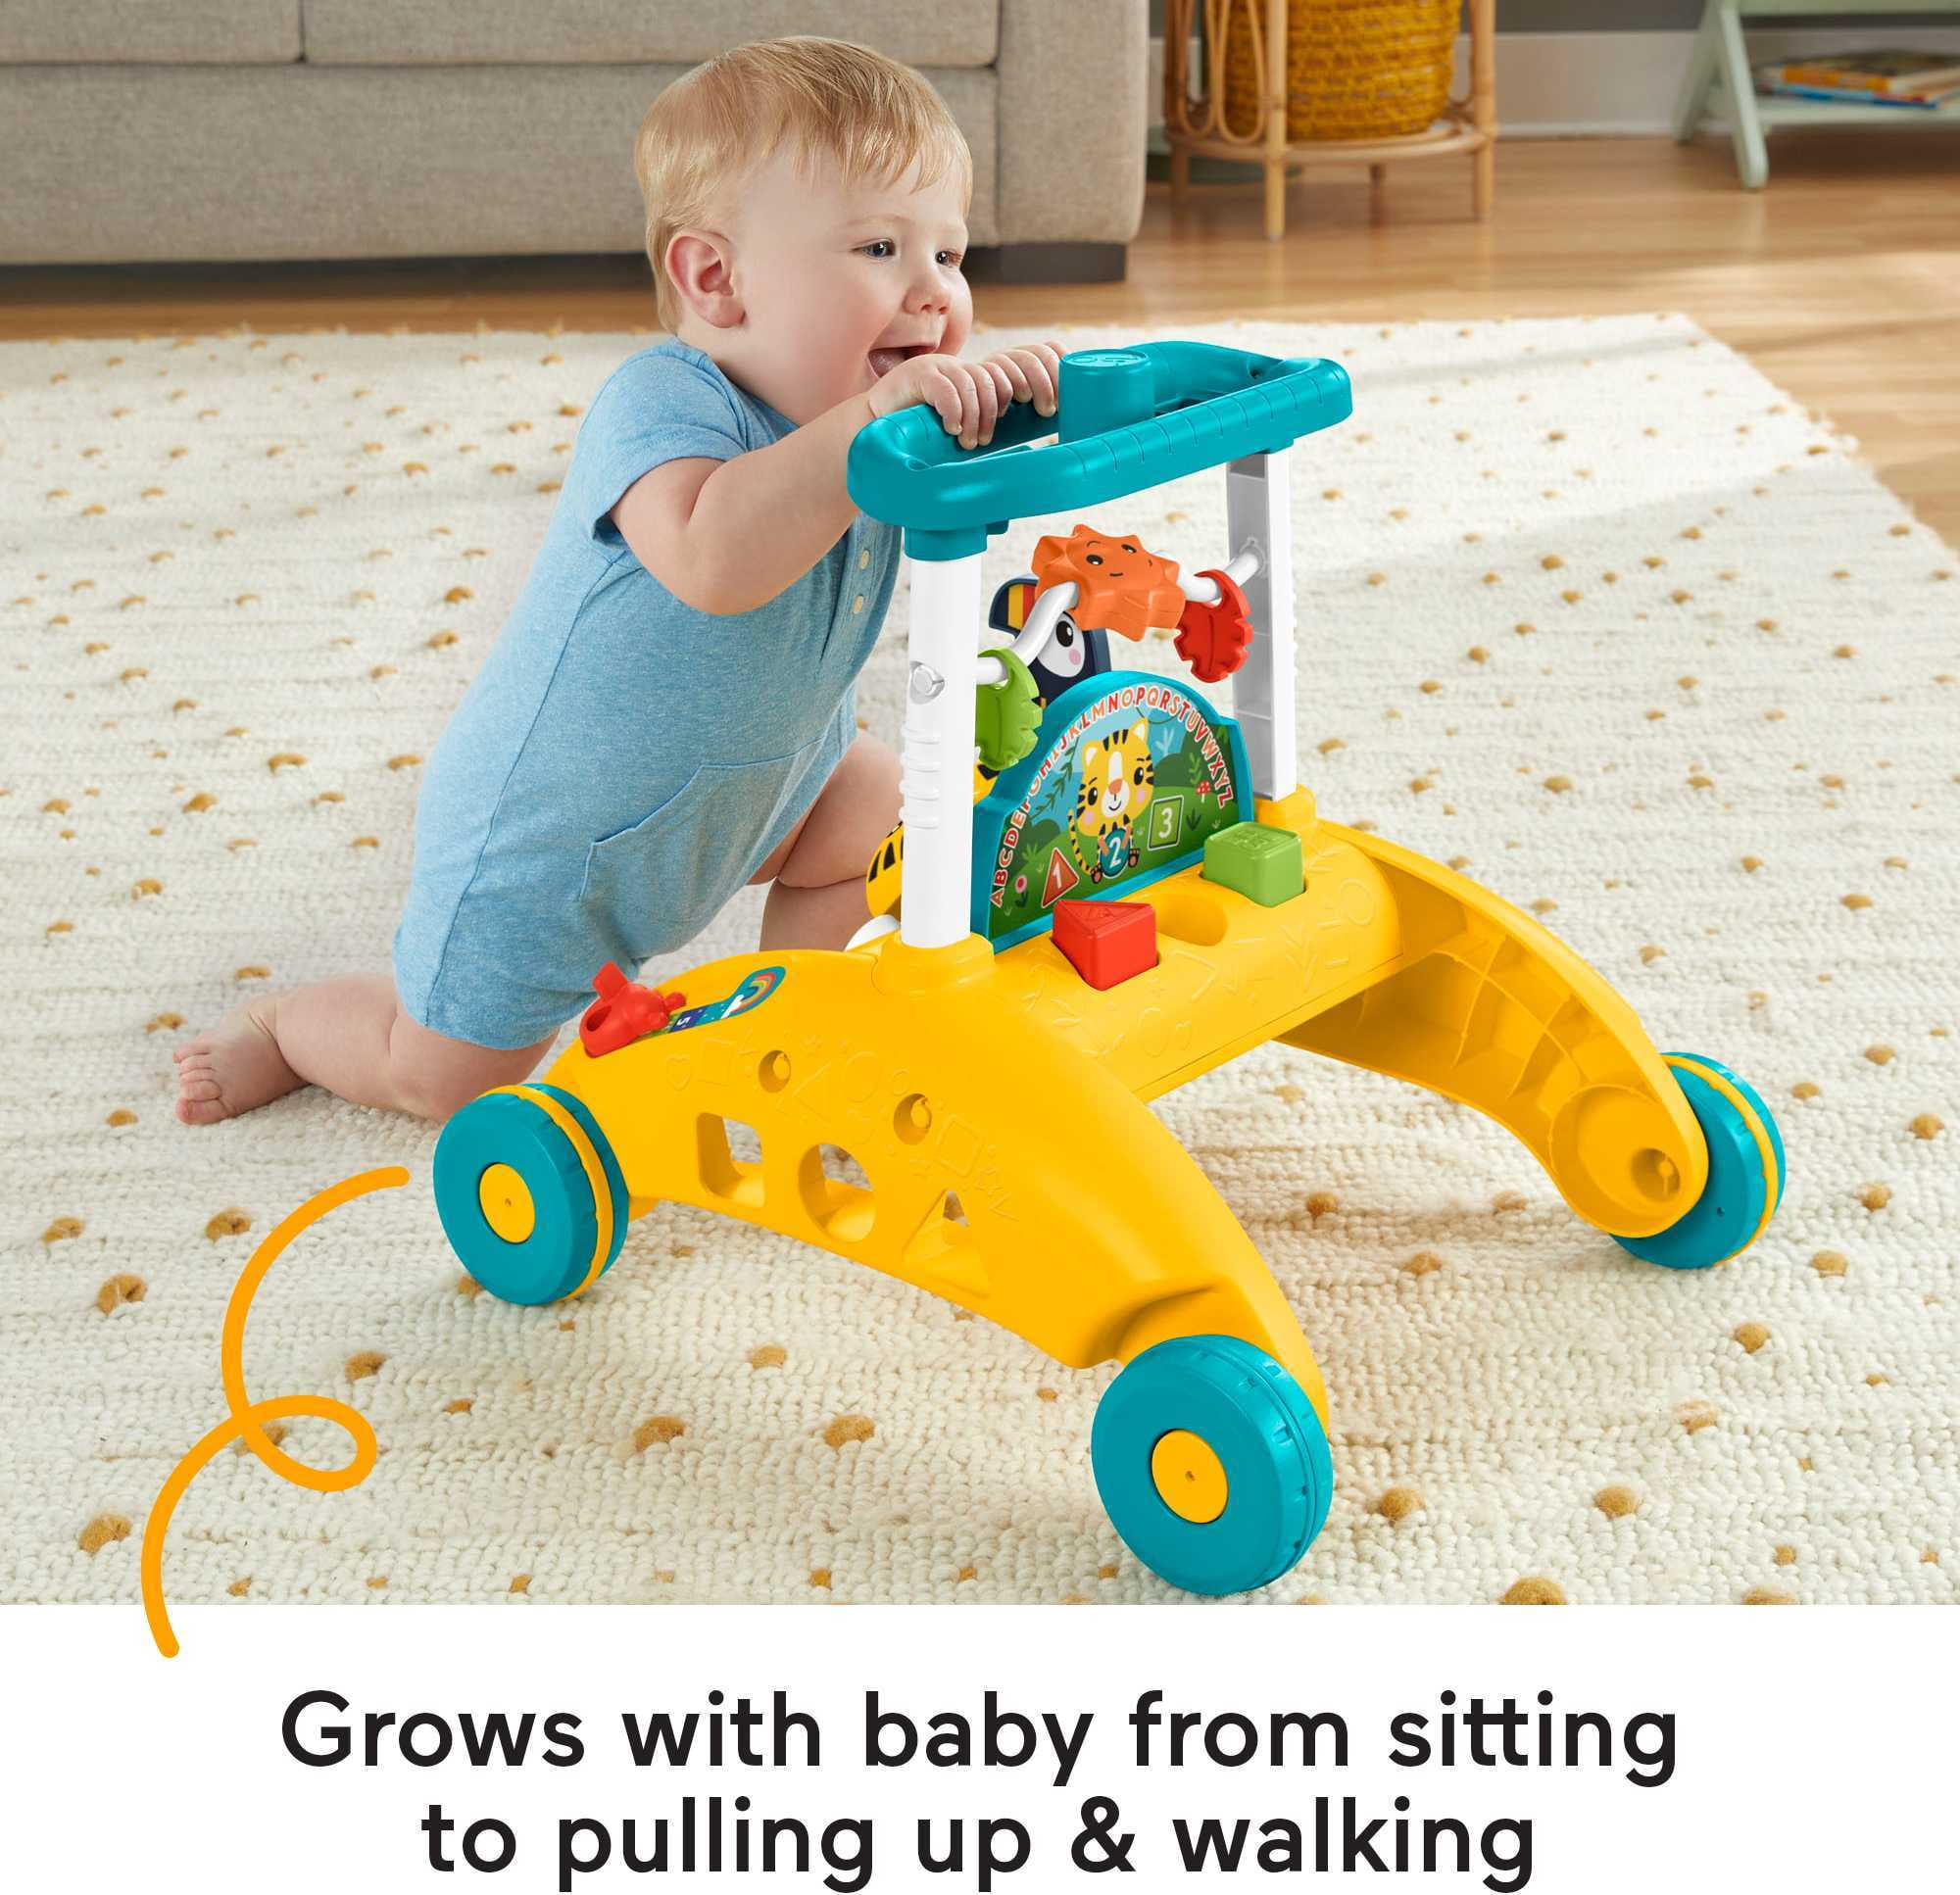 Fisher-Price 2-Sided Steady Speed Tiger Walker, Baby Learning Toy - 2